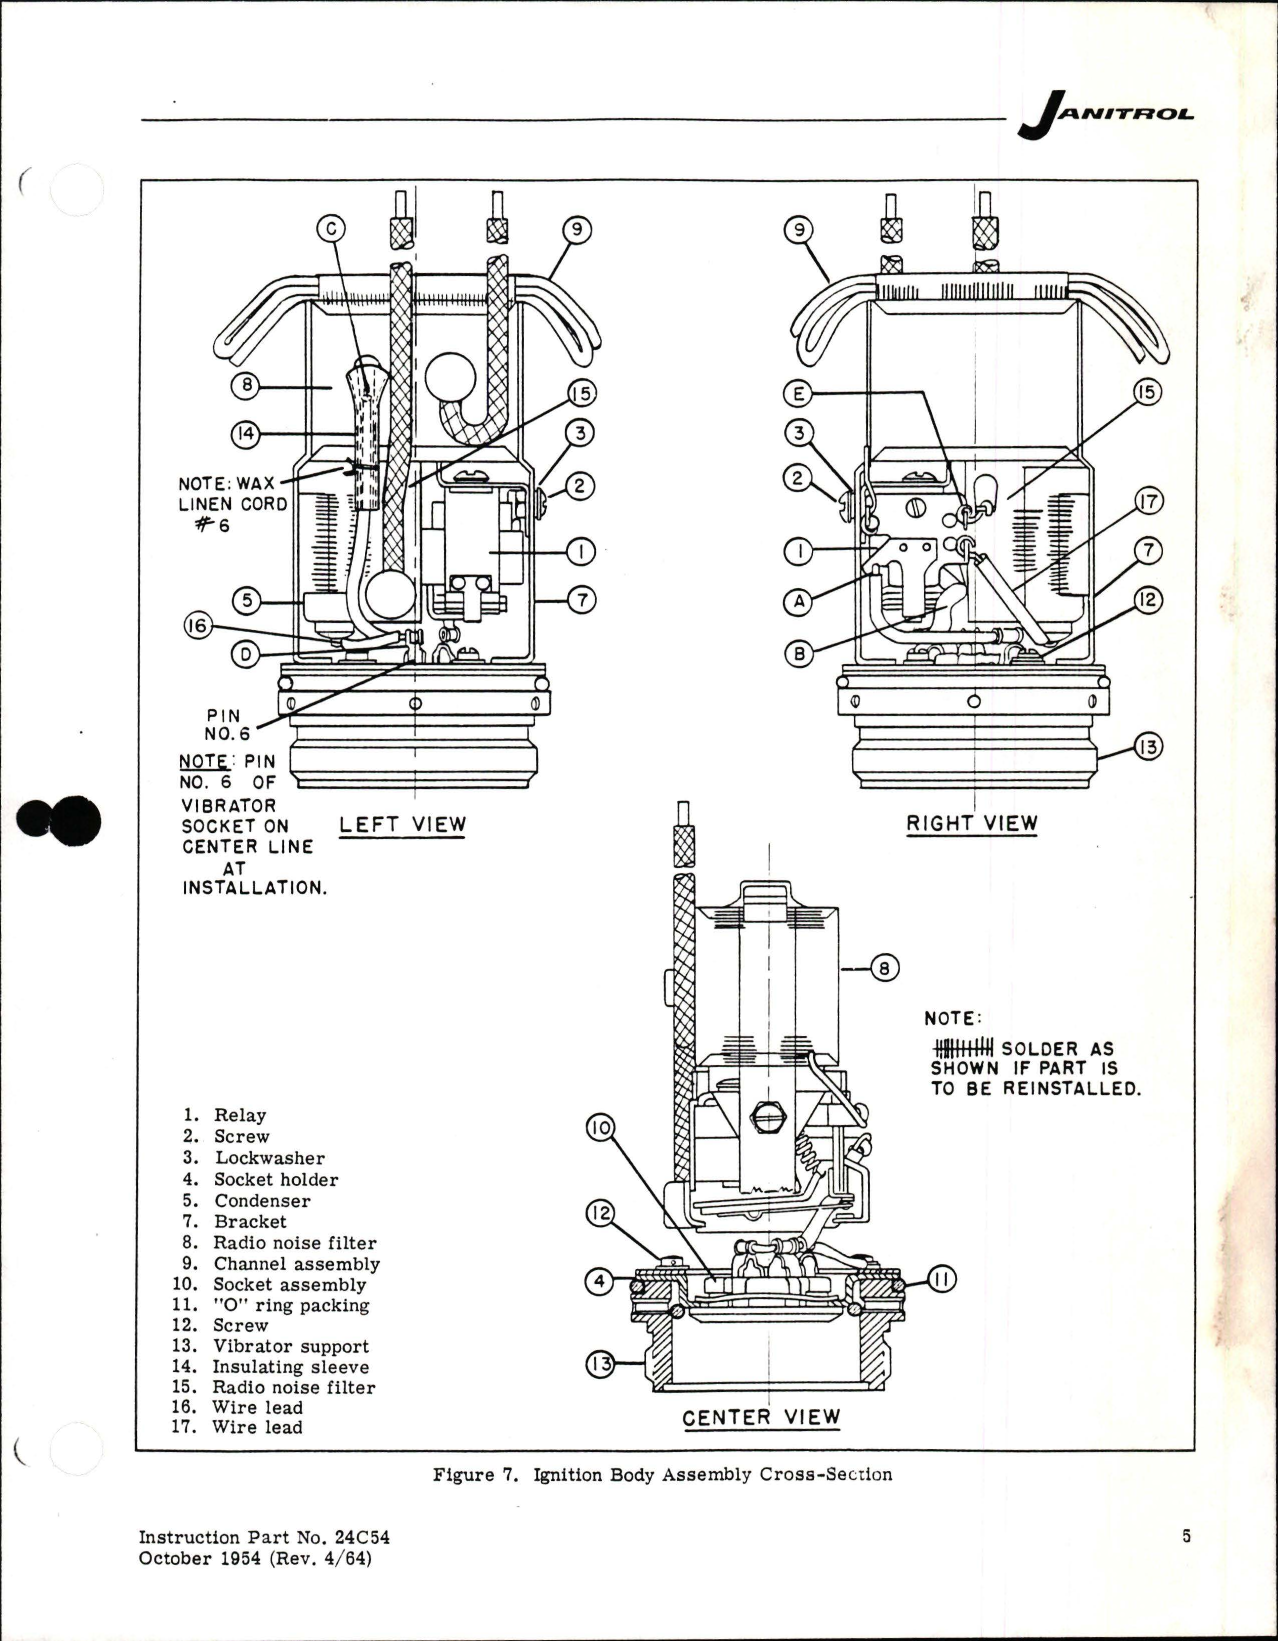 Sample page 5 from AirCorps Library document: Maintenance Instructions for Ignition Unit Assembly - Part 11C30